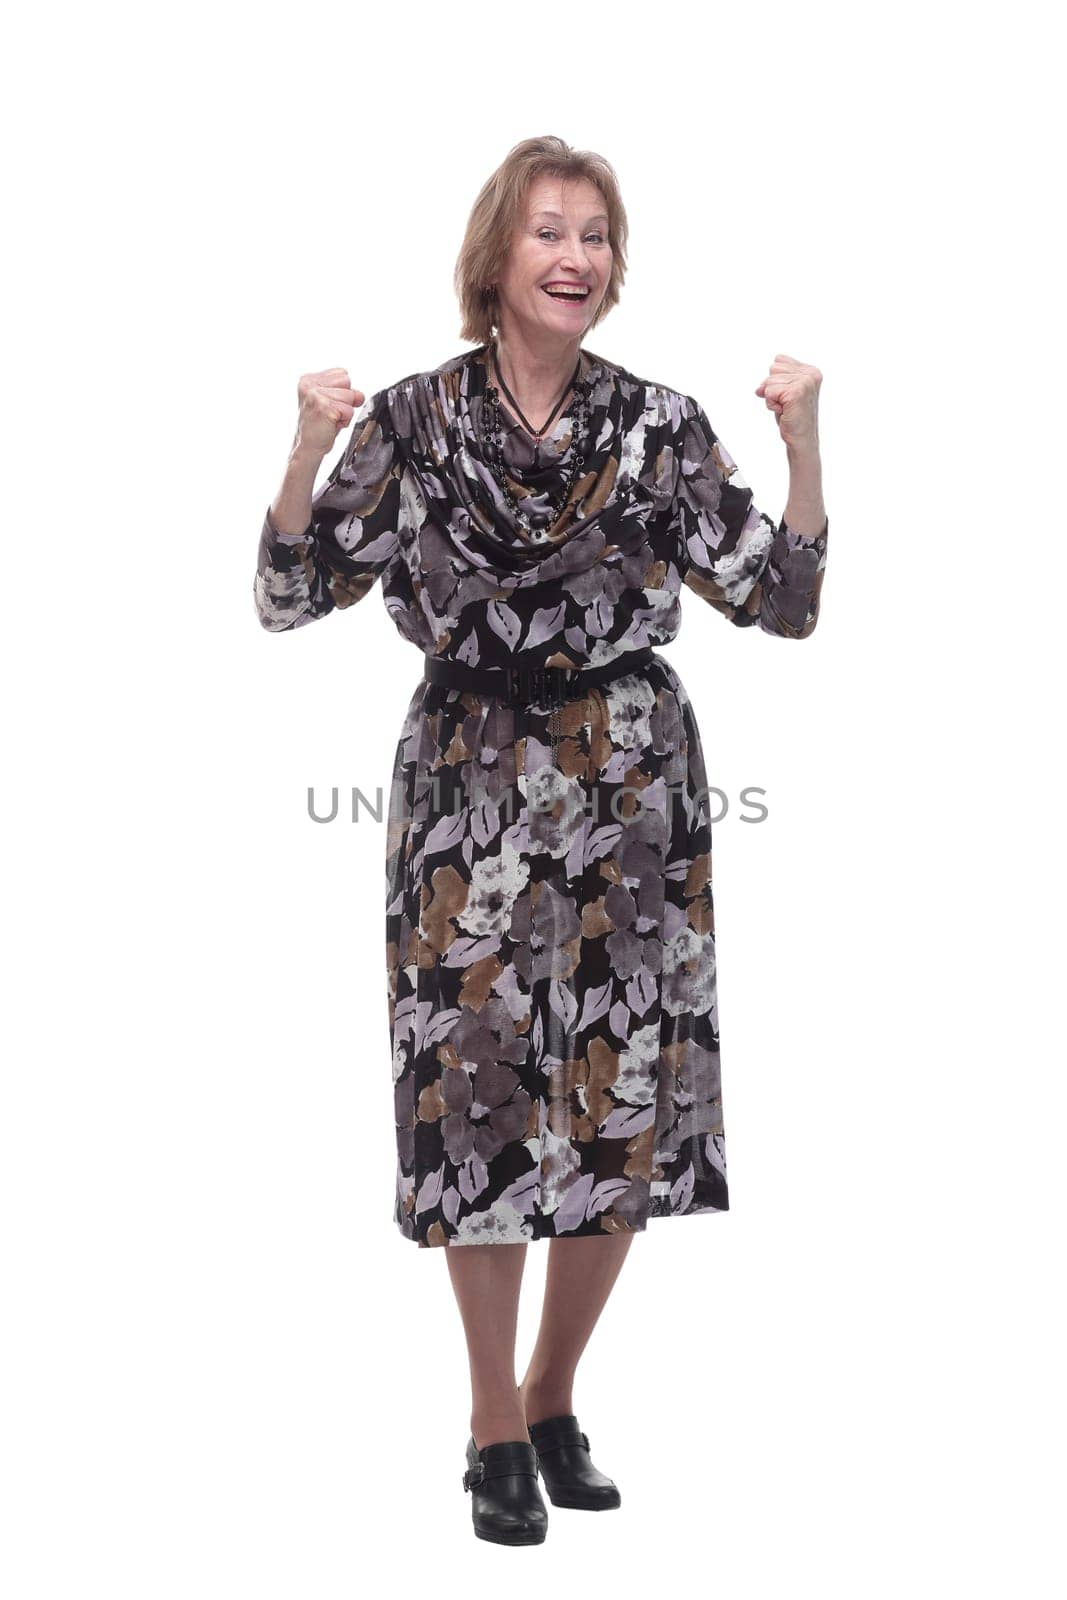 Old adult glad excited cheerful lady smiling, laughing, screaming, raising hands, opened mouth, isolated over white background